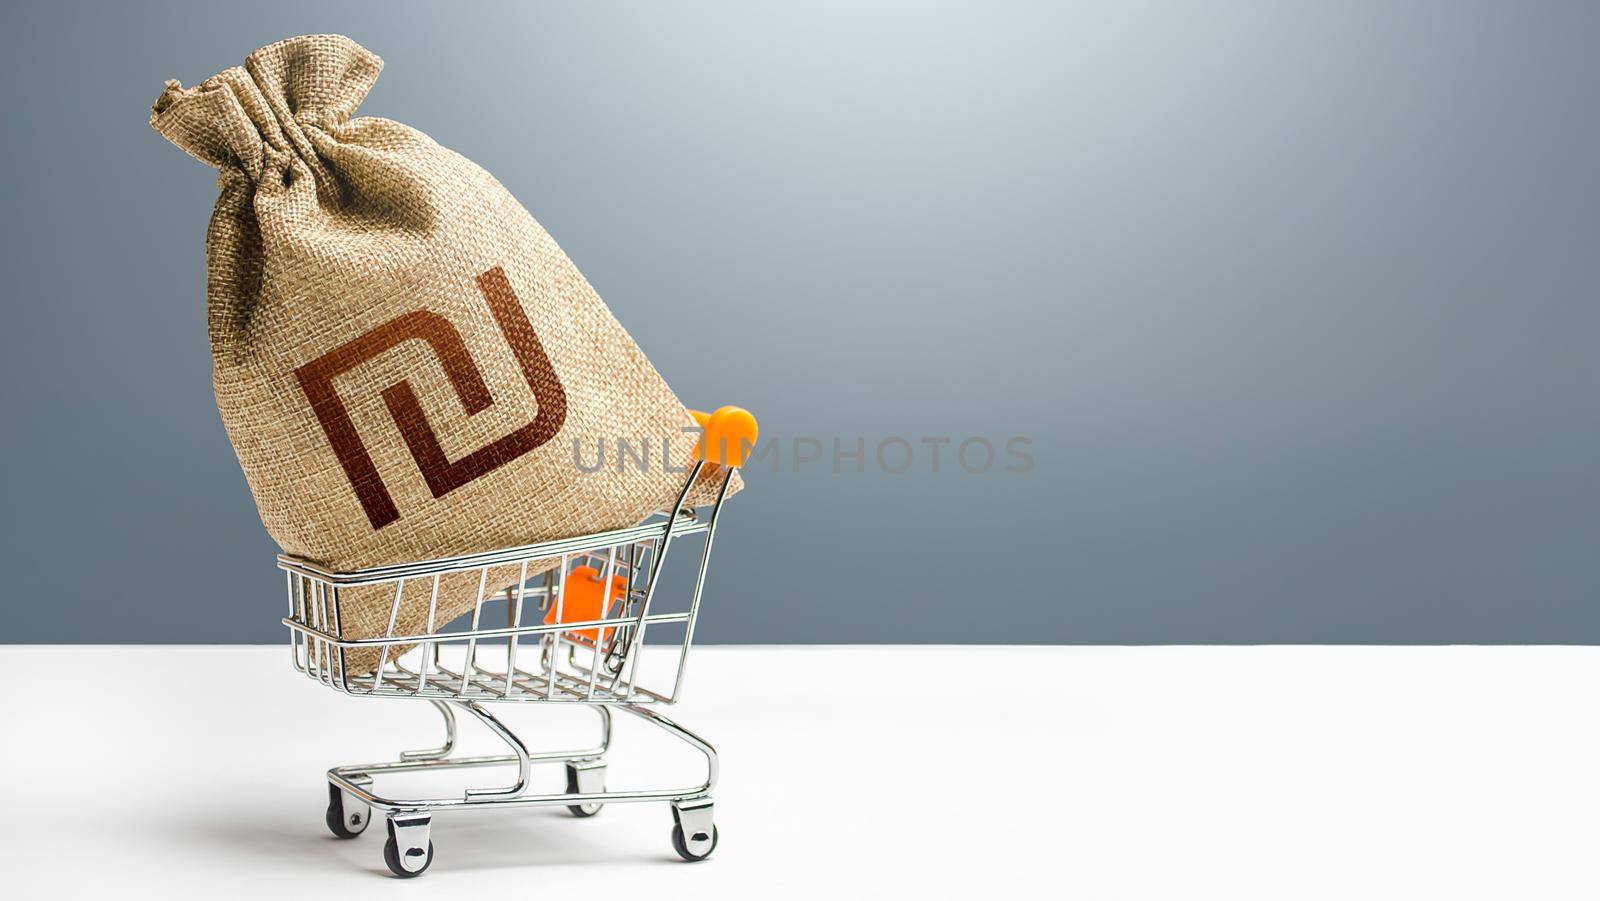 Israeli shekel money bag in a shopping cart. Public budgeting. Profits and super profits. Business and trade concept. Minimum living wage. Loans, microloans. Consumer basket. Economic bubbles. by iLixe48